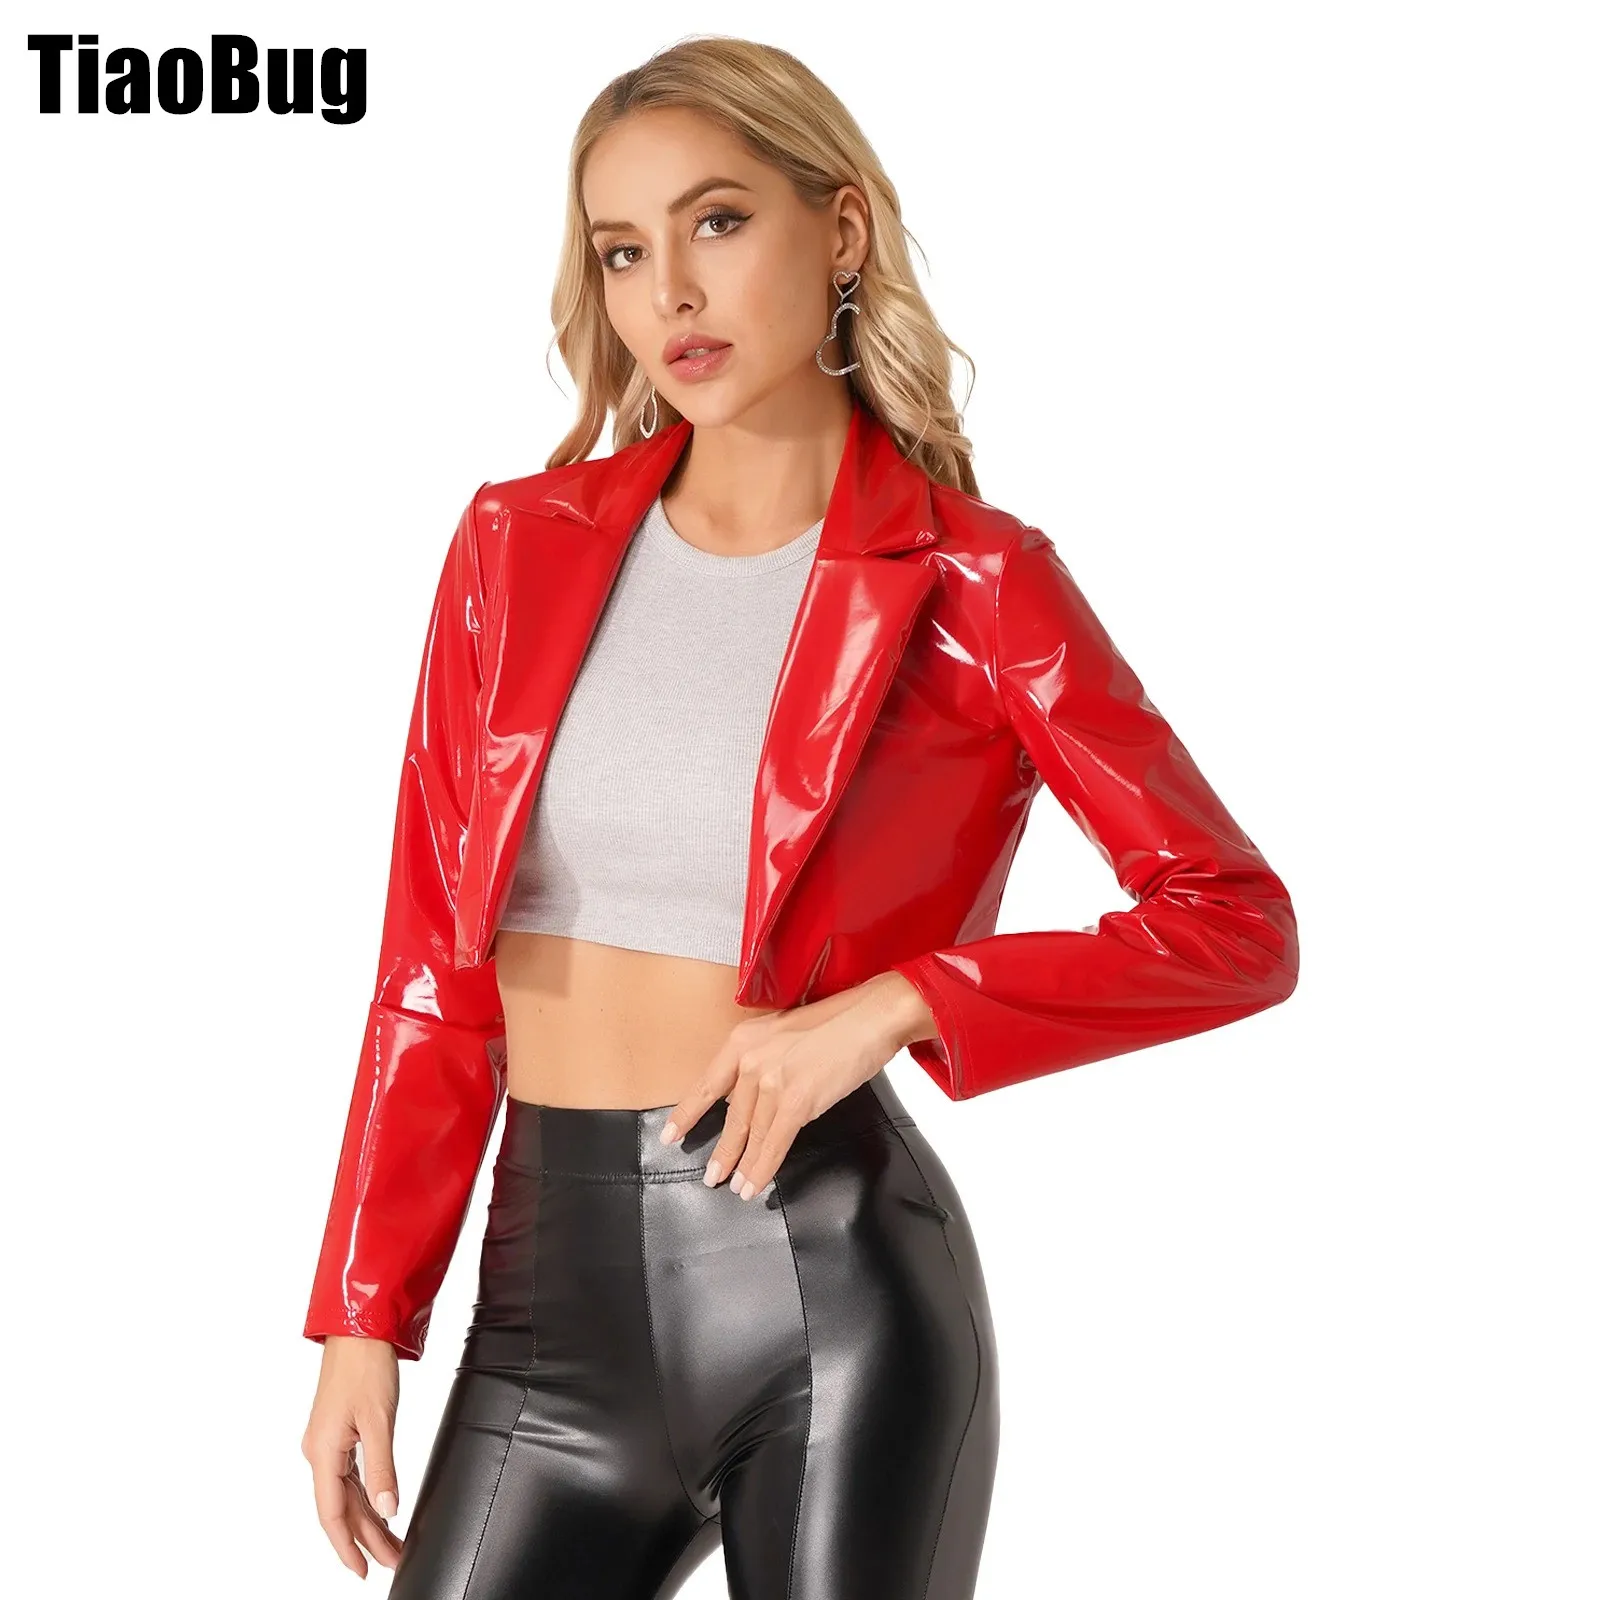 Womens Patent Leather Jacket Fashion Lapel Wet Look Long Sleeve Cropped Coat for Party Club Music Festival birthday music greeting card glowing cards party favors musical happy dad 3d bless for supplies blessing gifts